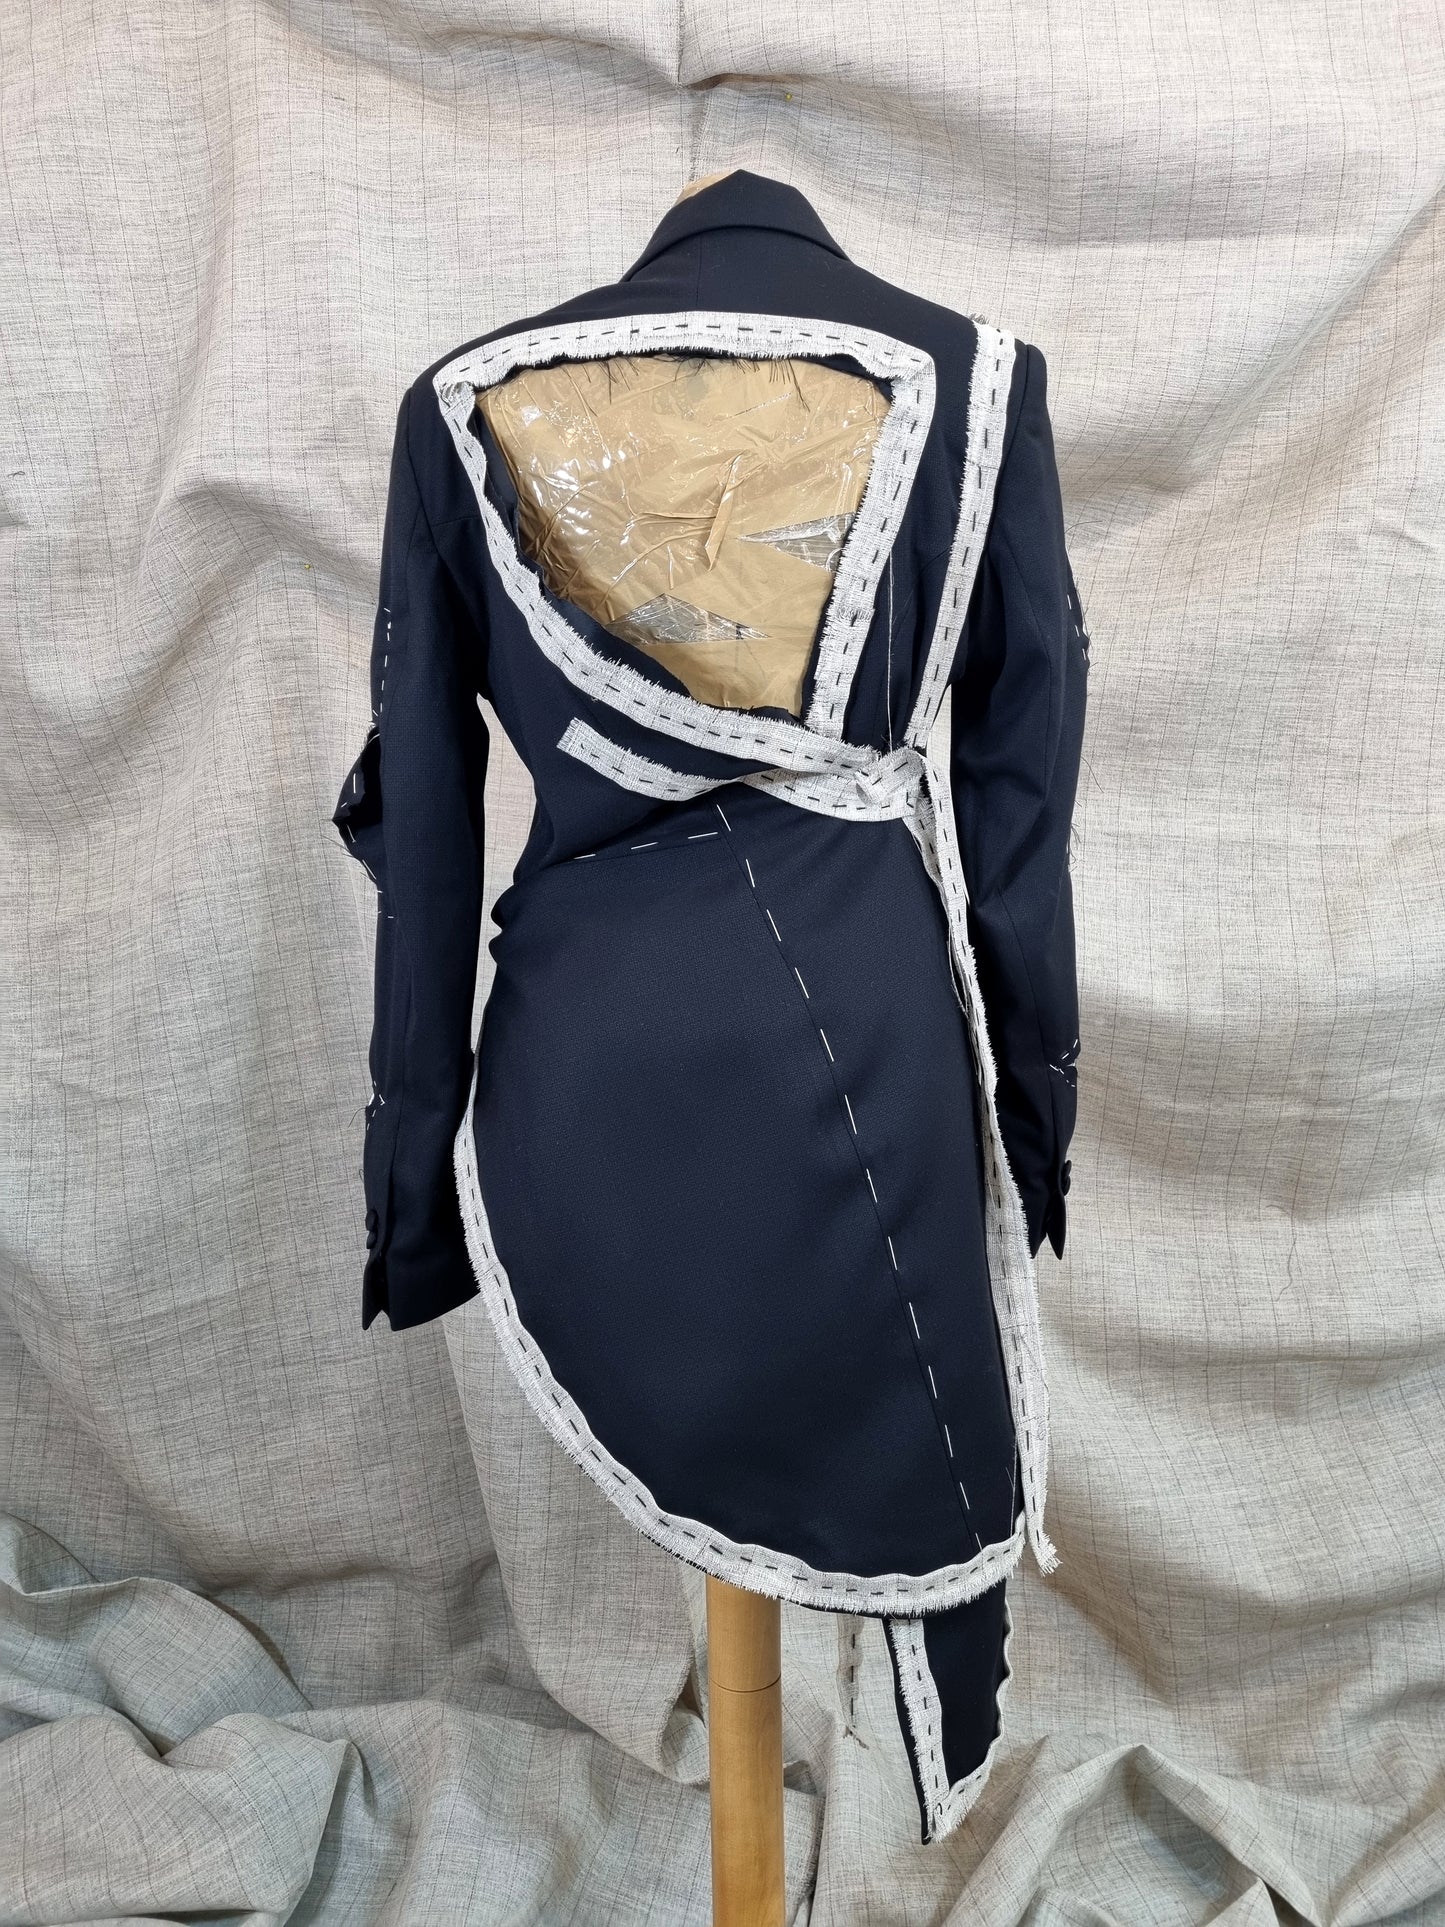 Cut-Out Tailcoat With Handmade Decorative Stitching